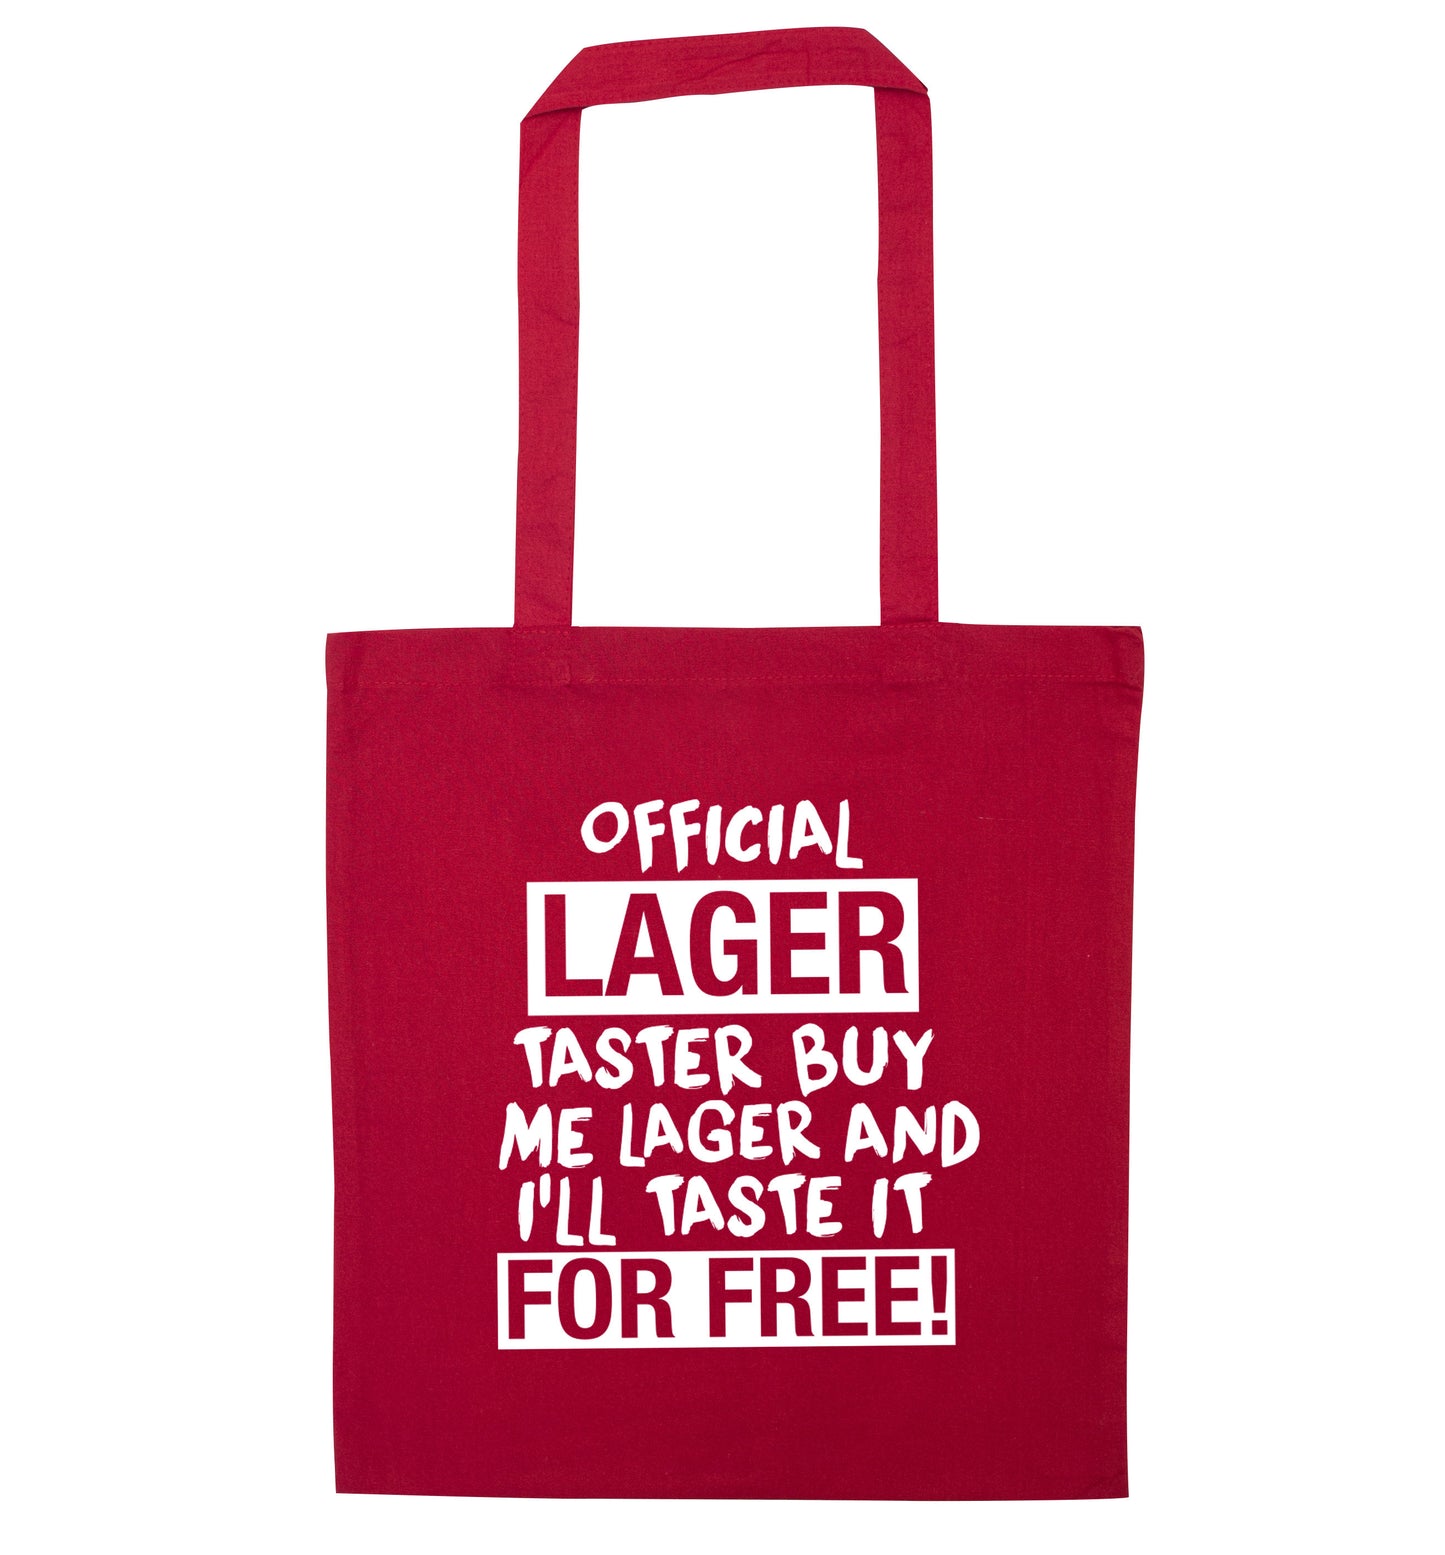 Official lager taster buy me lager and I'll taste it for free! red tote bag